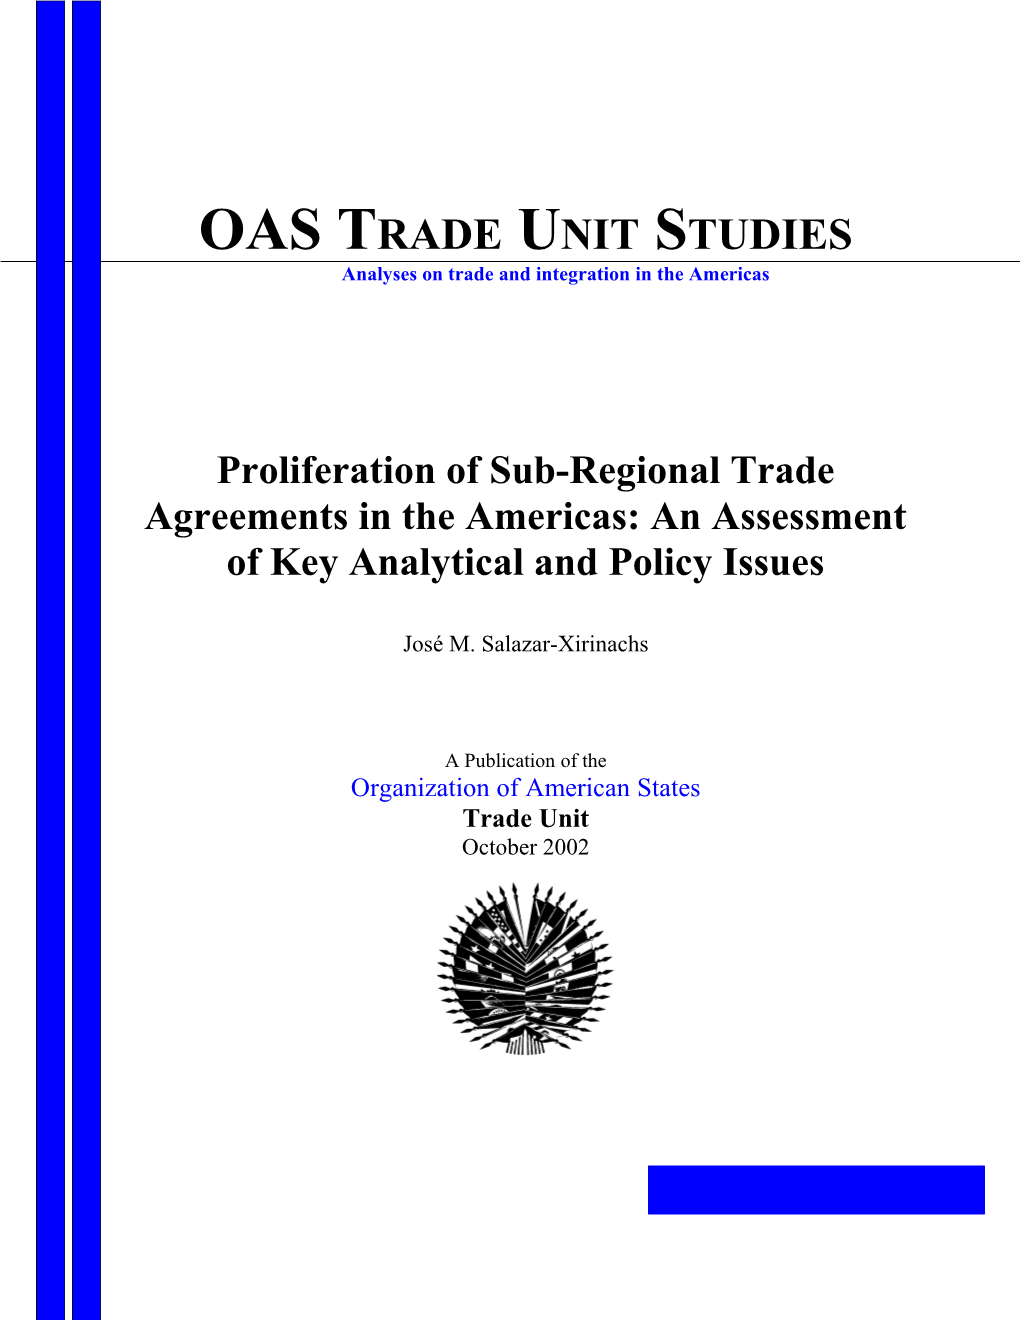 Toward Free Trade in the Americas: the 2000 Report